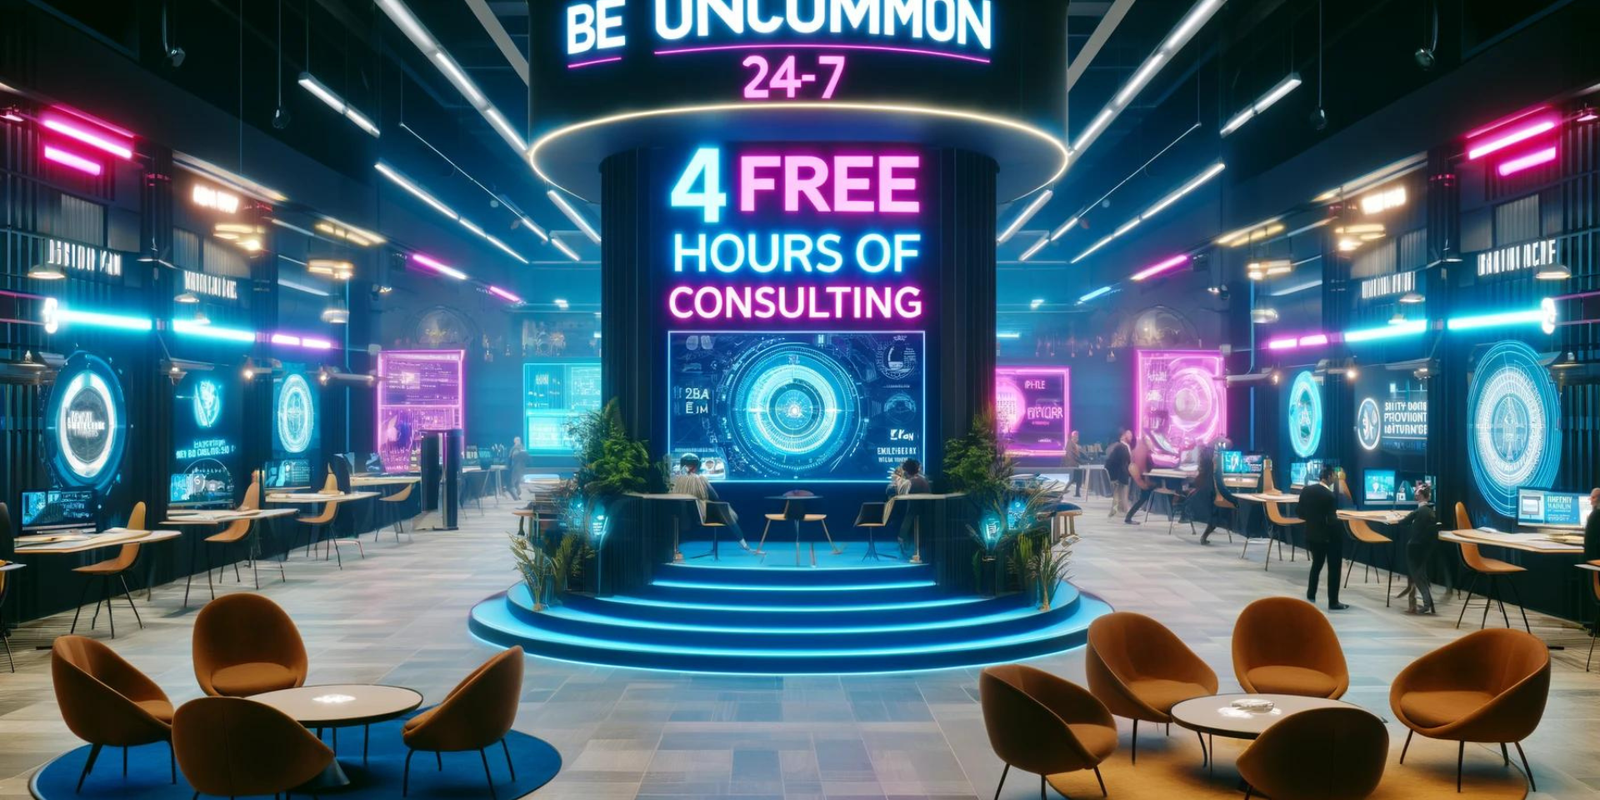 Ask me about 4 hours FREE consulting Neon banner by BeUncommon 24-7